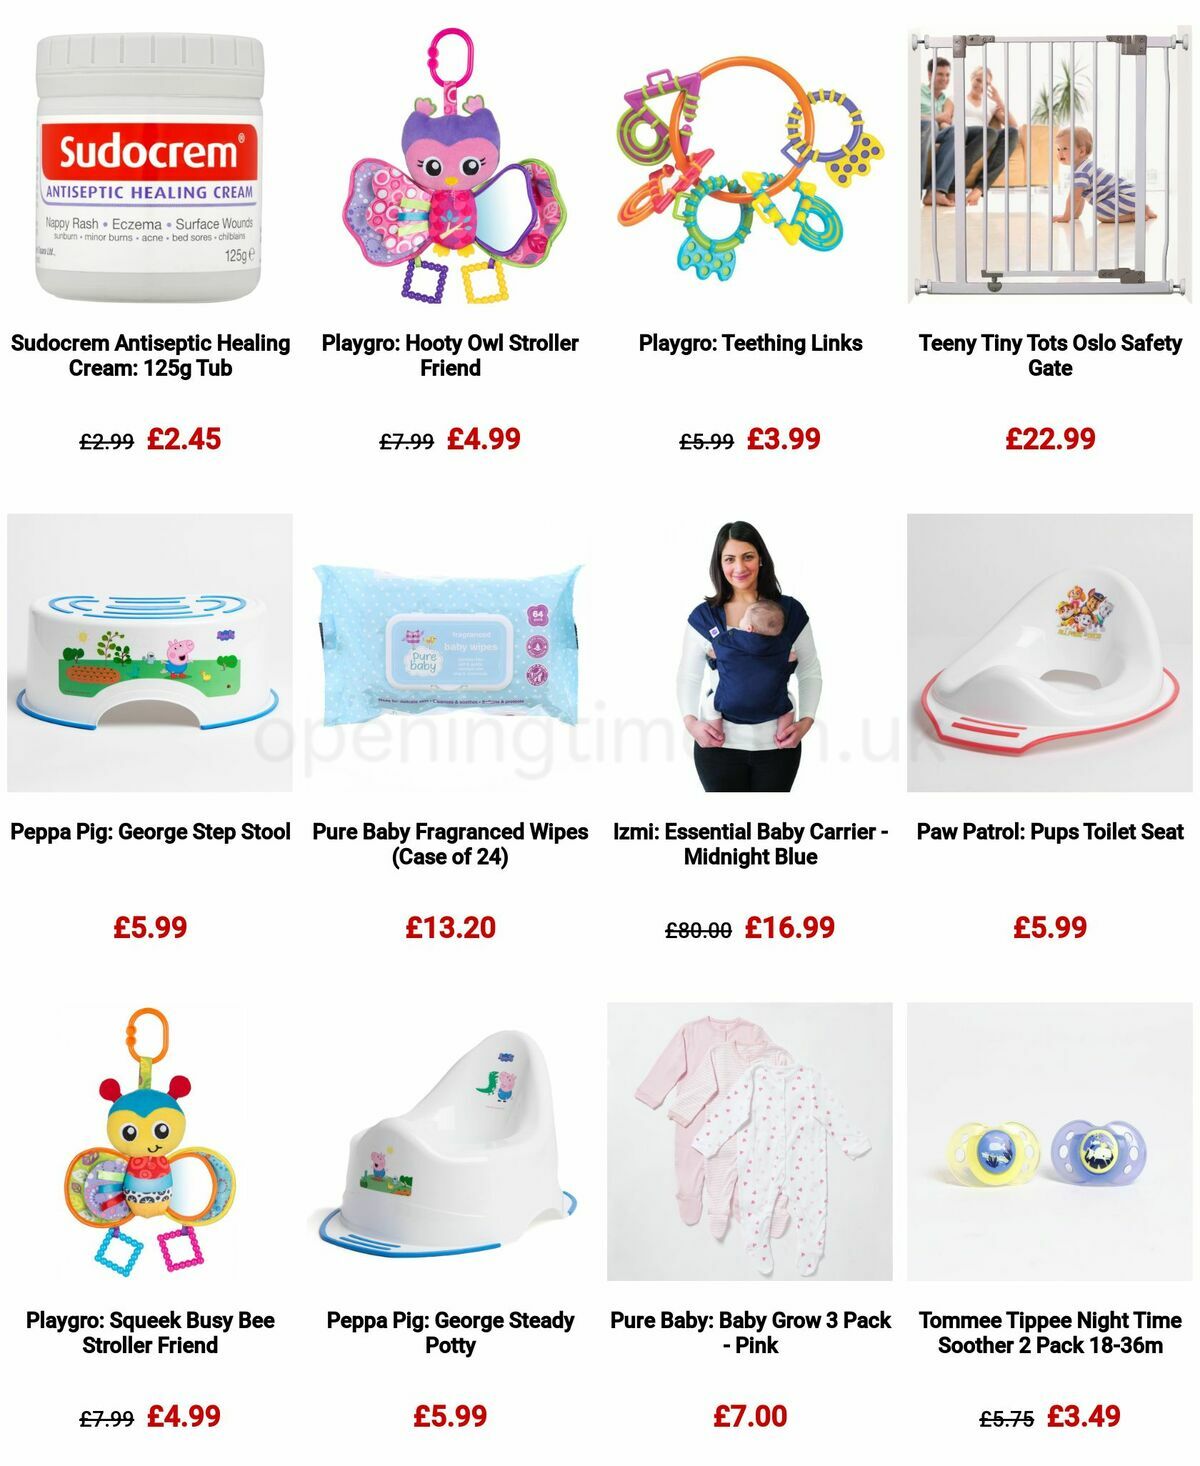 Home Bargains Baby & Child Offers from 20 August